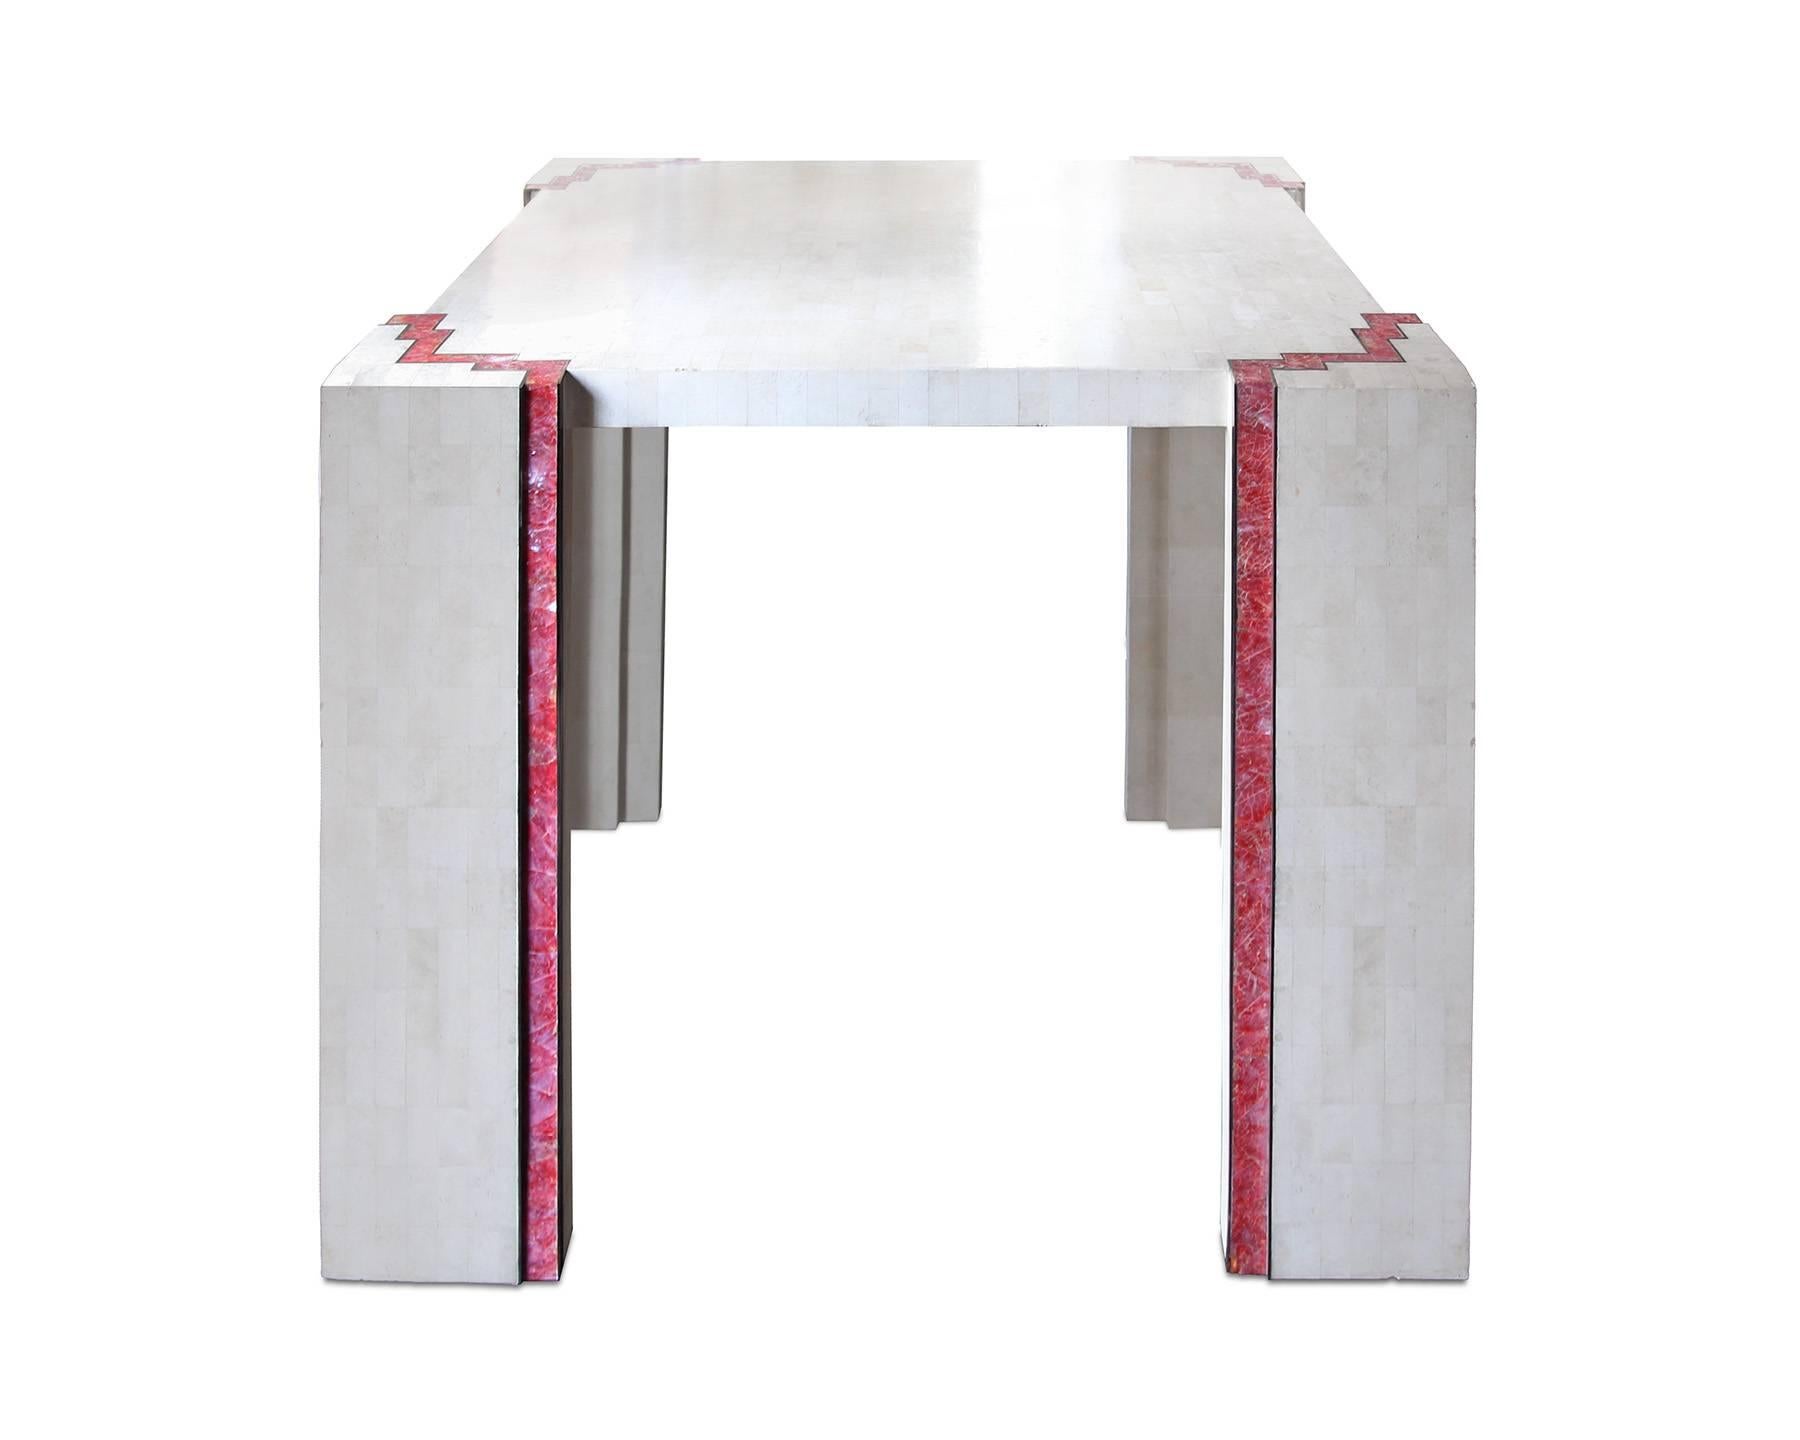 Unique and stunning four-top dining or game table of tessellated marble, pink stone and brass inlay. The stair-step design references Art Deco design and adds a touch of whimsy and color to this very unique piece. Unmarked but attributed to